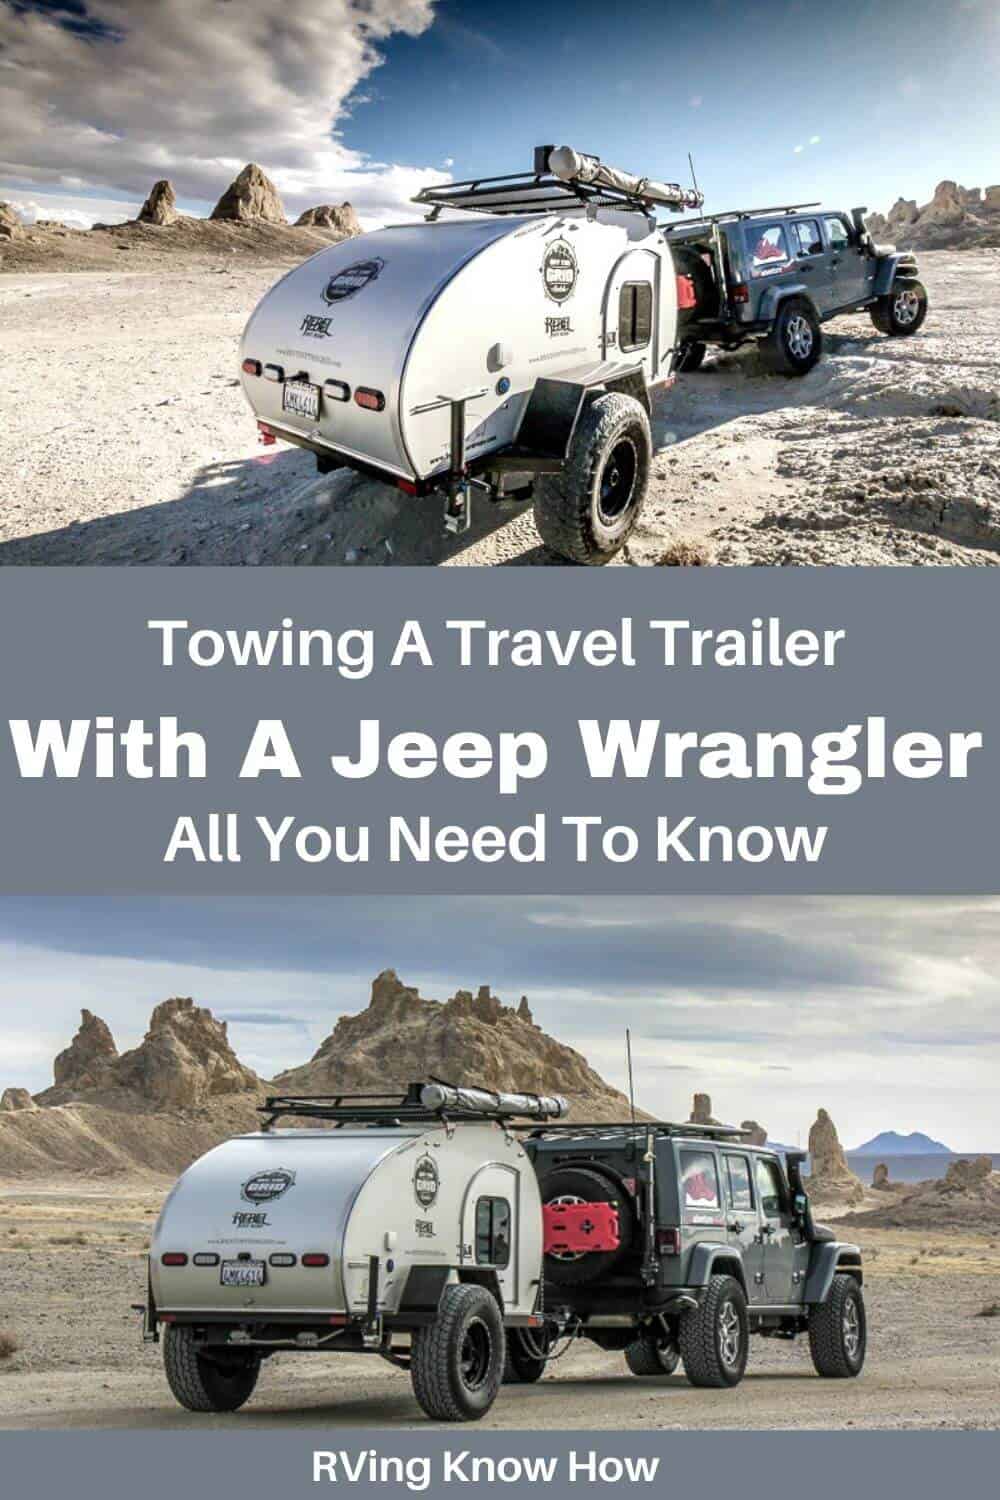 Towing A Travel Trailer With A Jeep Wrangler_ All You Need To Know